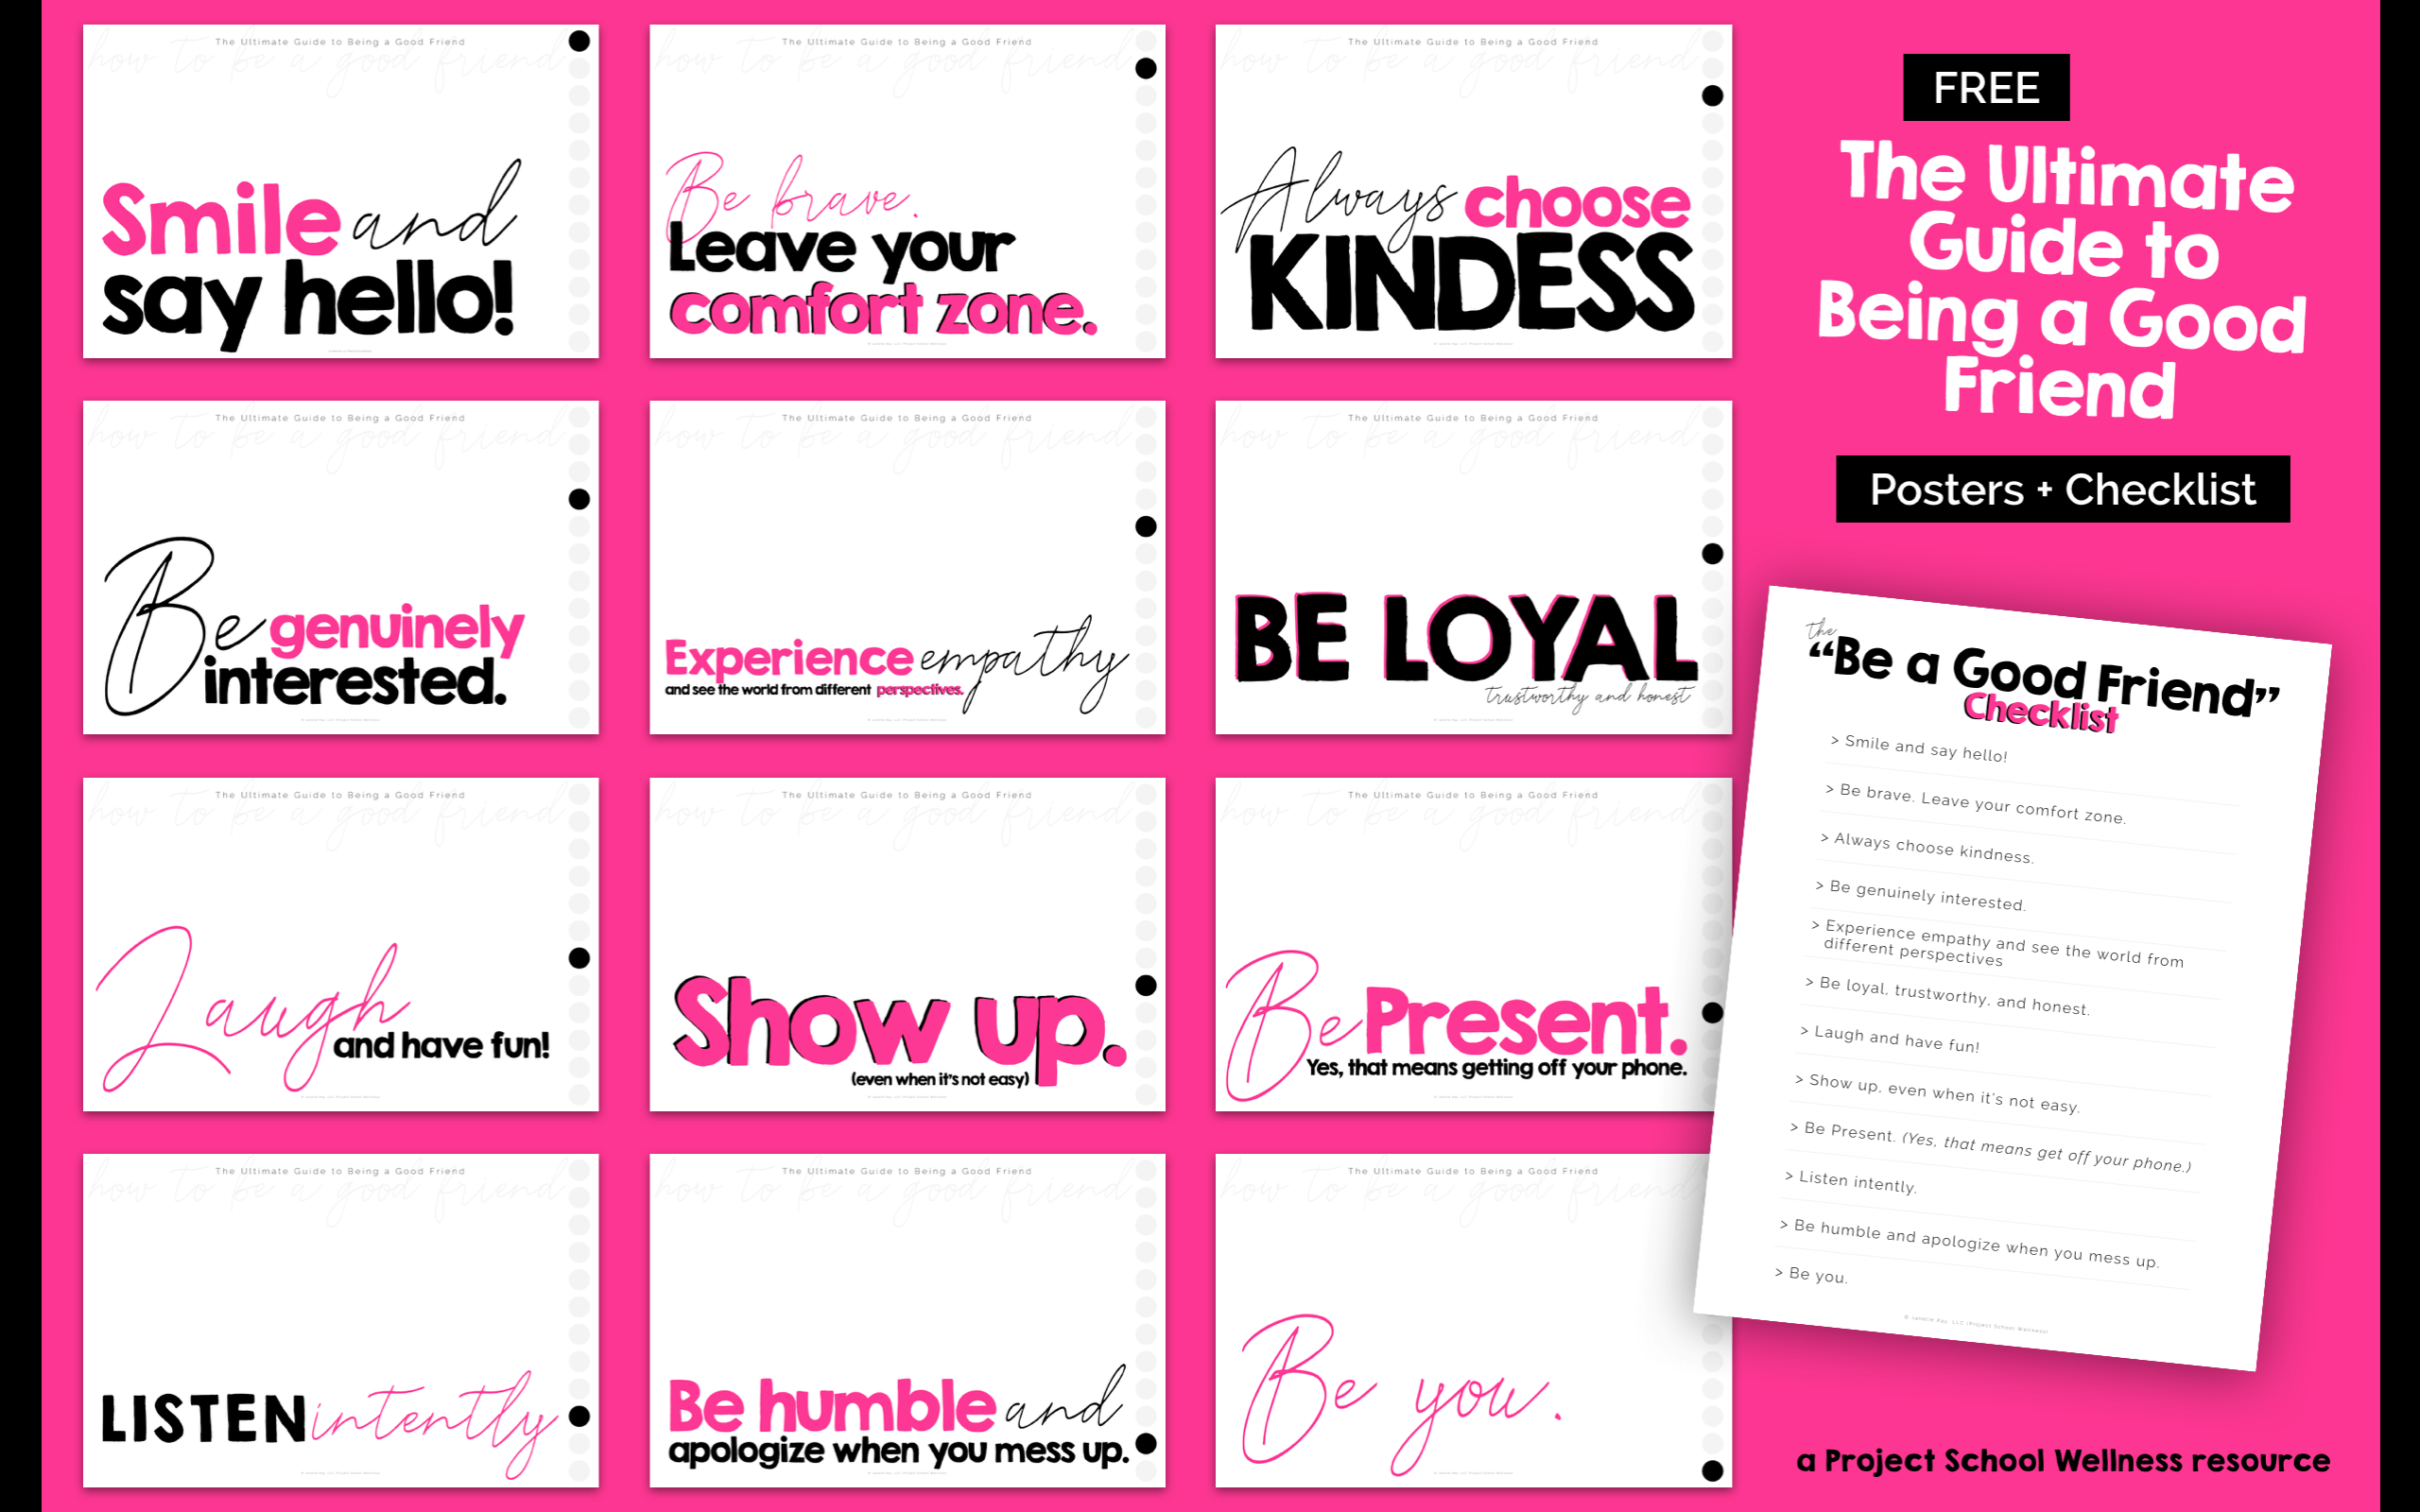 Free Classroom Posters - How to be A Good Friend. Use these posters in your classroom to promote being a good friend. Each poster features a social habit connected to being a good friend. These free classroom posters are perfect for any middle school classroom across the curriculum. Head over to Project School Wellness to download and print your posters.